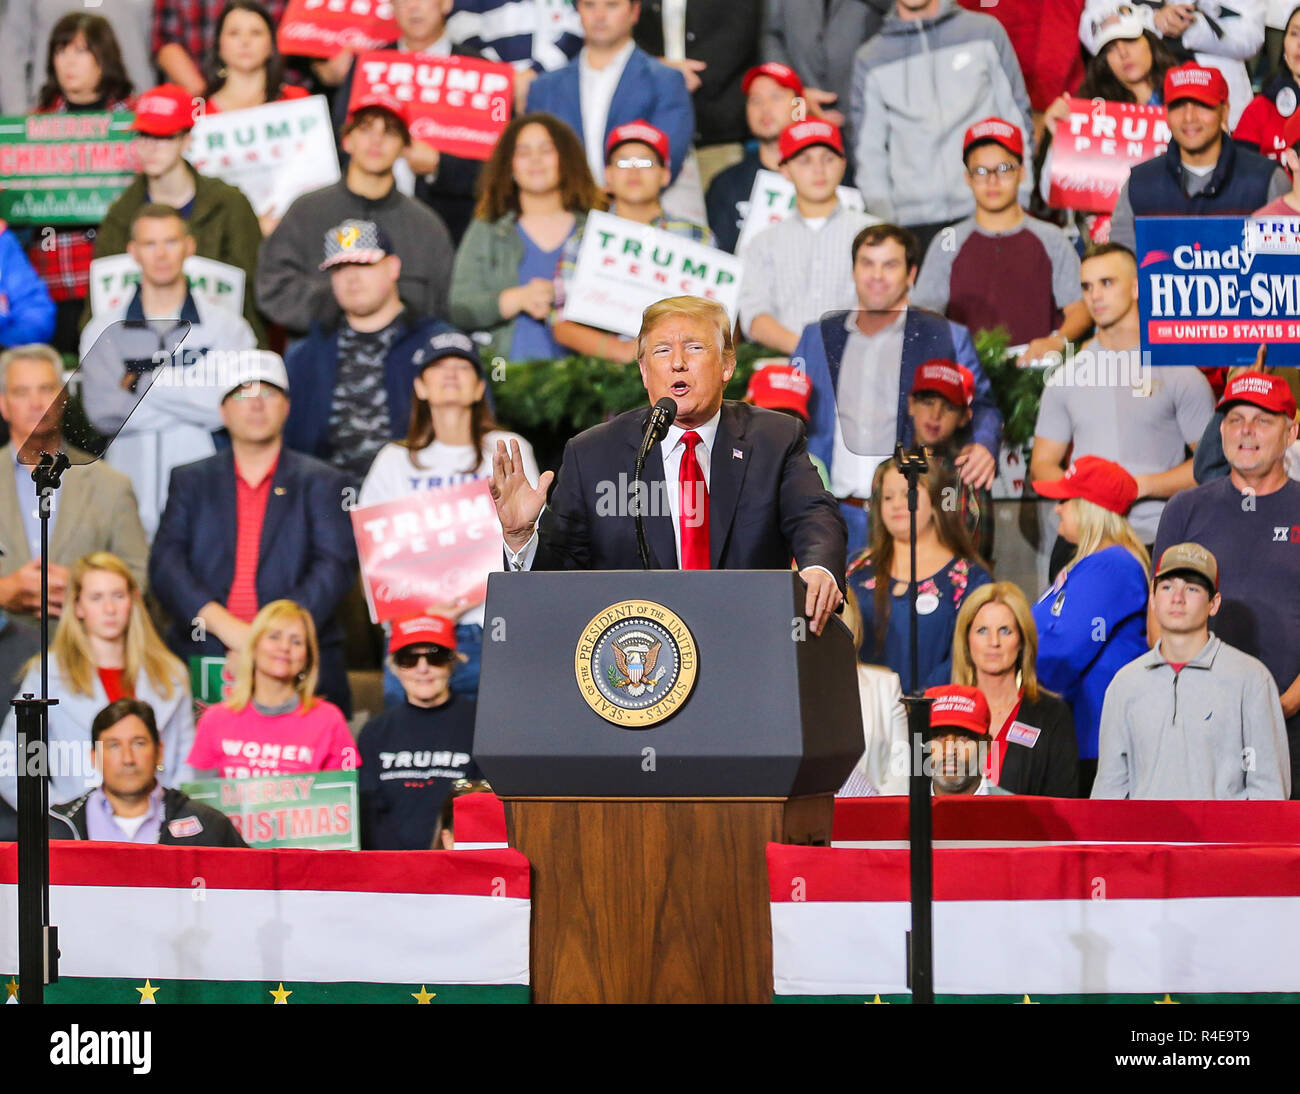 Biloxi, Mississippi, USA. 26th Nov, 2018. President Donald Trump in Biloxi, Mississippi. for rally in support of Sen. Cindy Hyde-Smith. The run-off election against Mike Espy for the U.S. Senate in Mississippi on November 27, 2018. Credit: Tom Pumphret/Alamy Live News Stock Photo